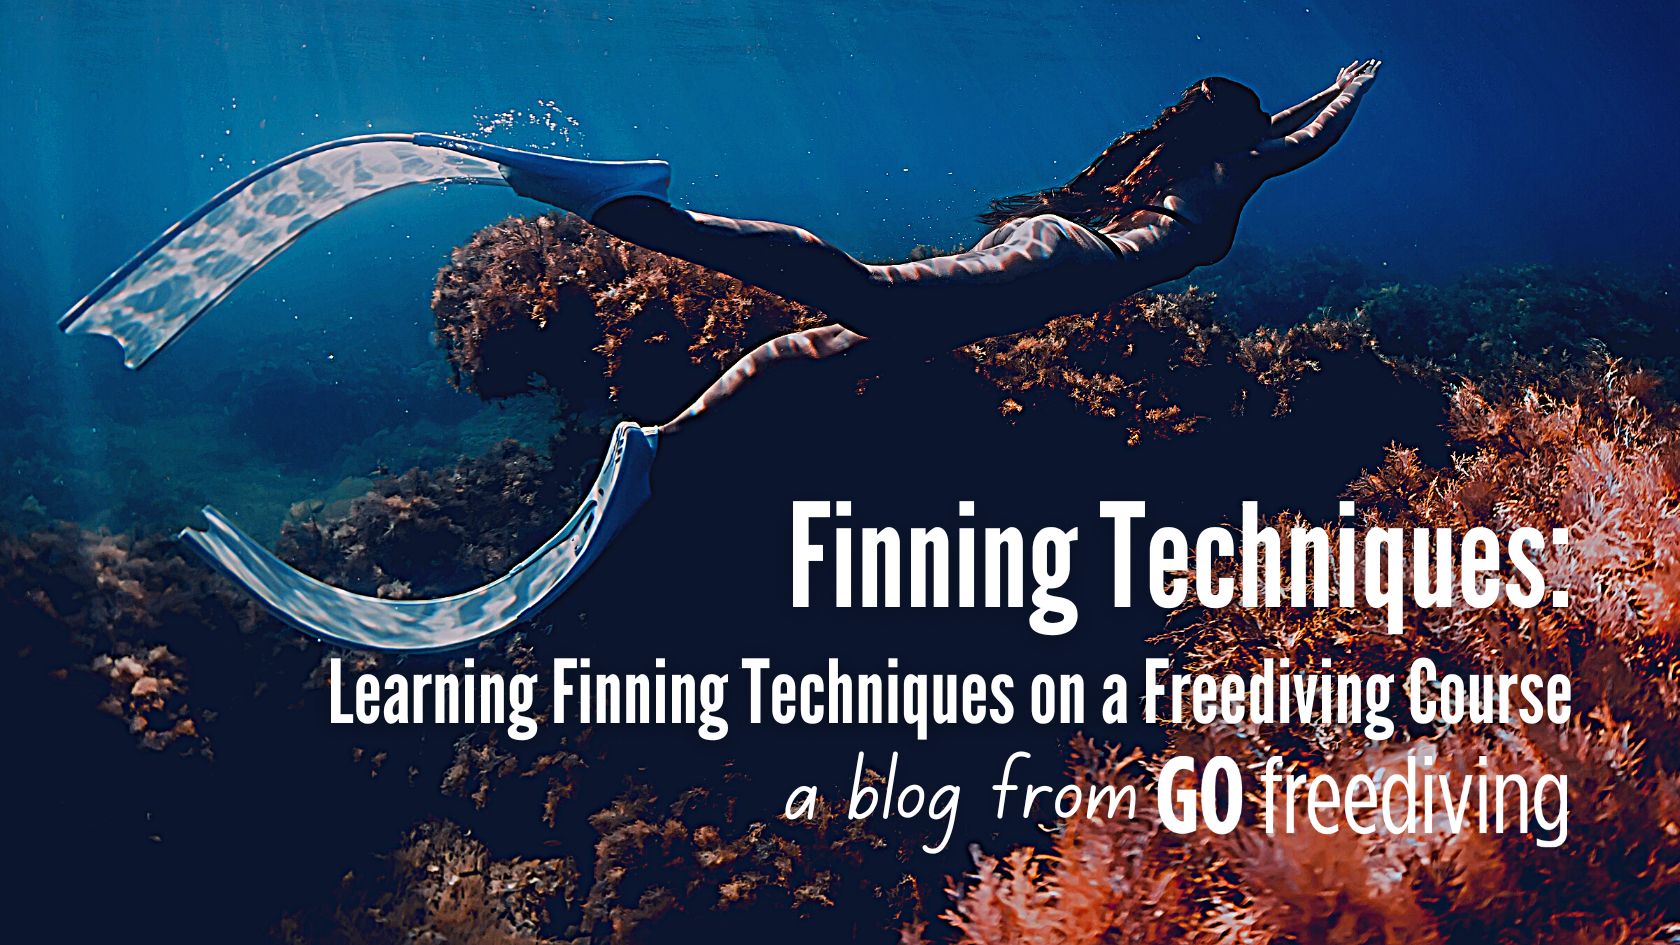 Learning Finning techniques on a Freediving Course - Go Freediving